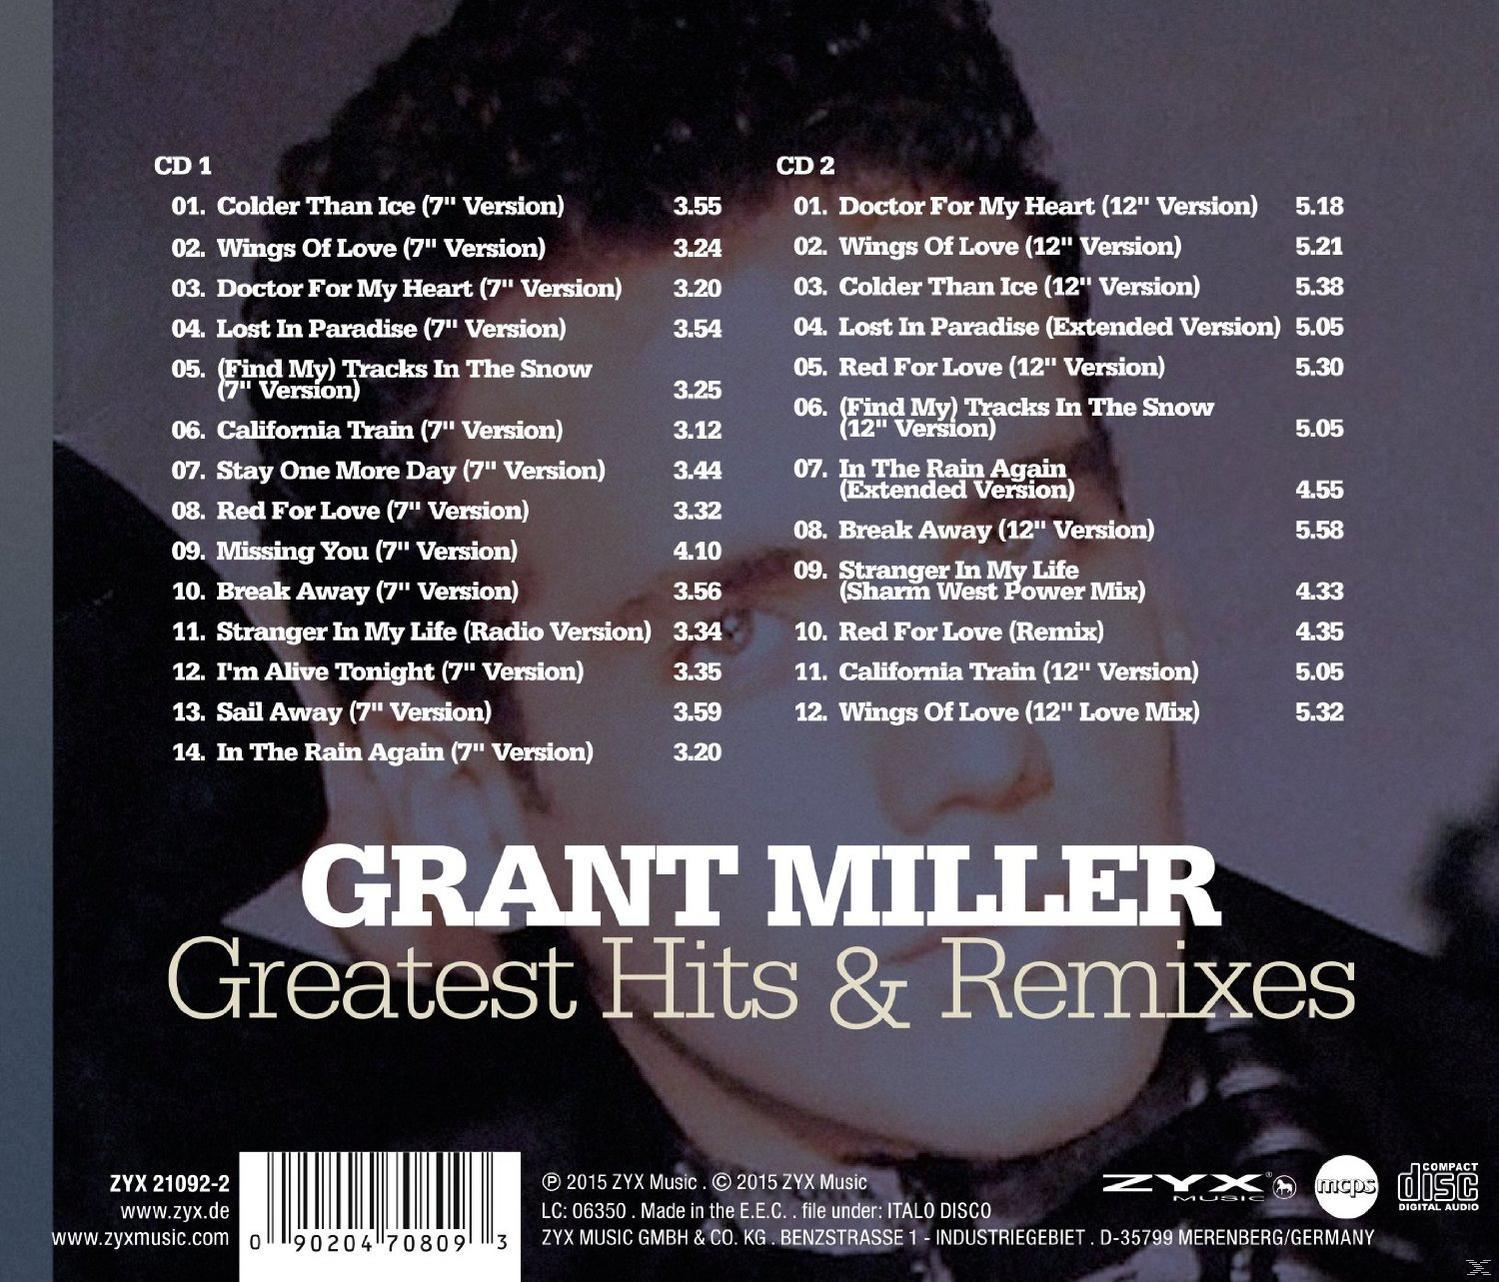 Hits - Greatest (CD) Remixes Grant Miller & -